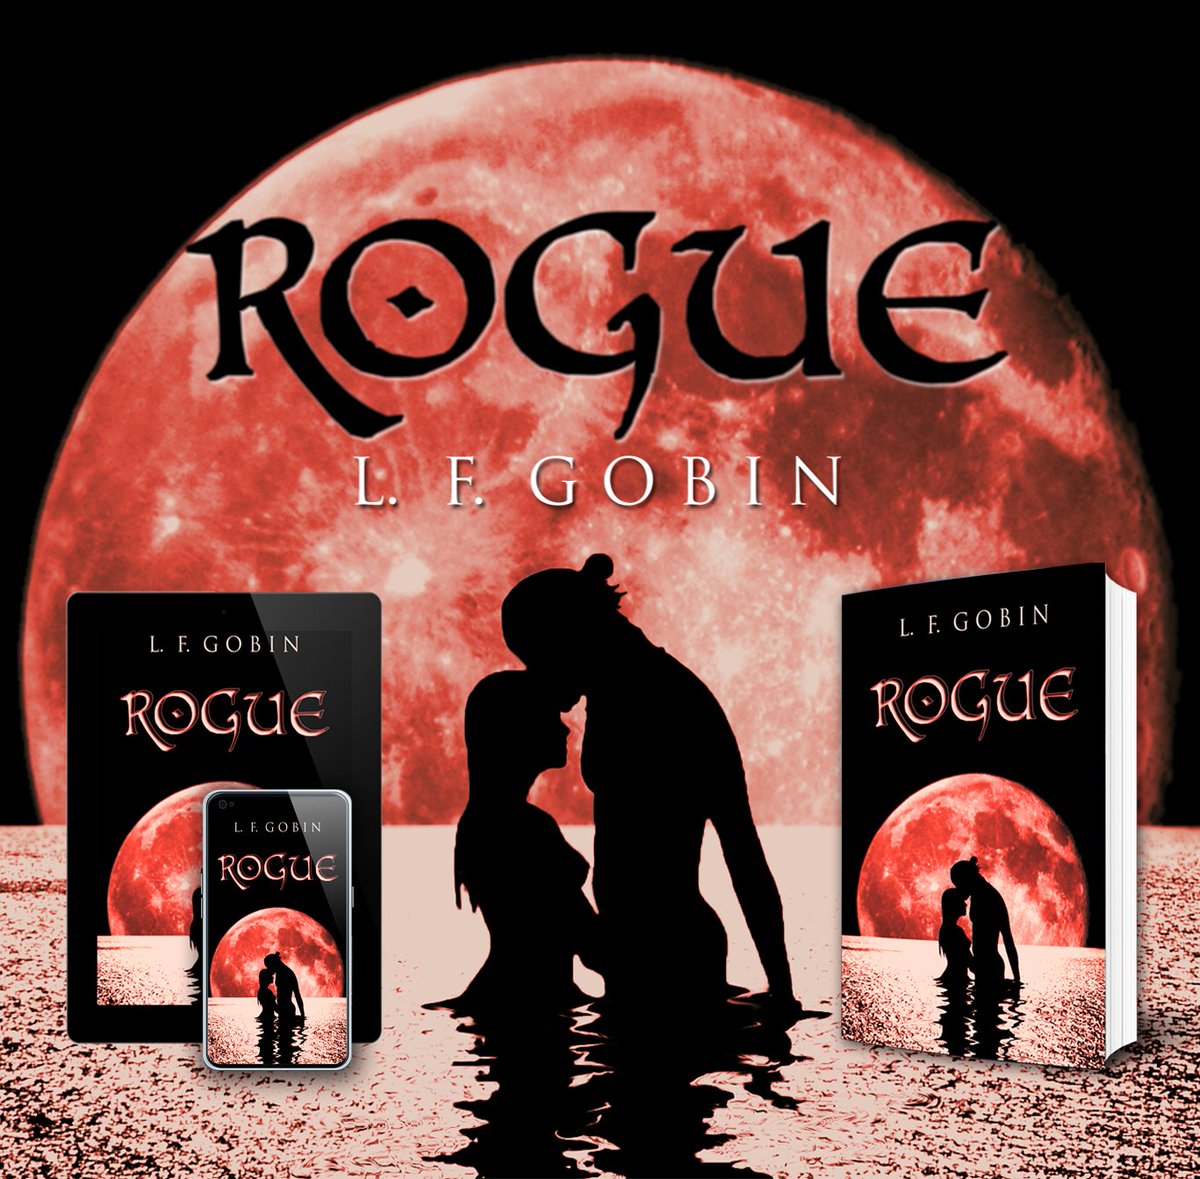 FREE BOOK! Rogue will be free to download and read on Amazon from 19th-23rd January! Rogue: amzn.eu/d/fyM9bbb #bookstagram #booksale #booklover #bookrecommendations #bookworm #supernaturalfiction #paranormalfiction #youngadultfantasybooks #youngadult #vampire #horror